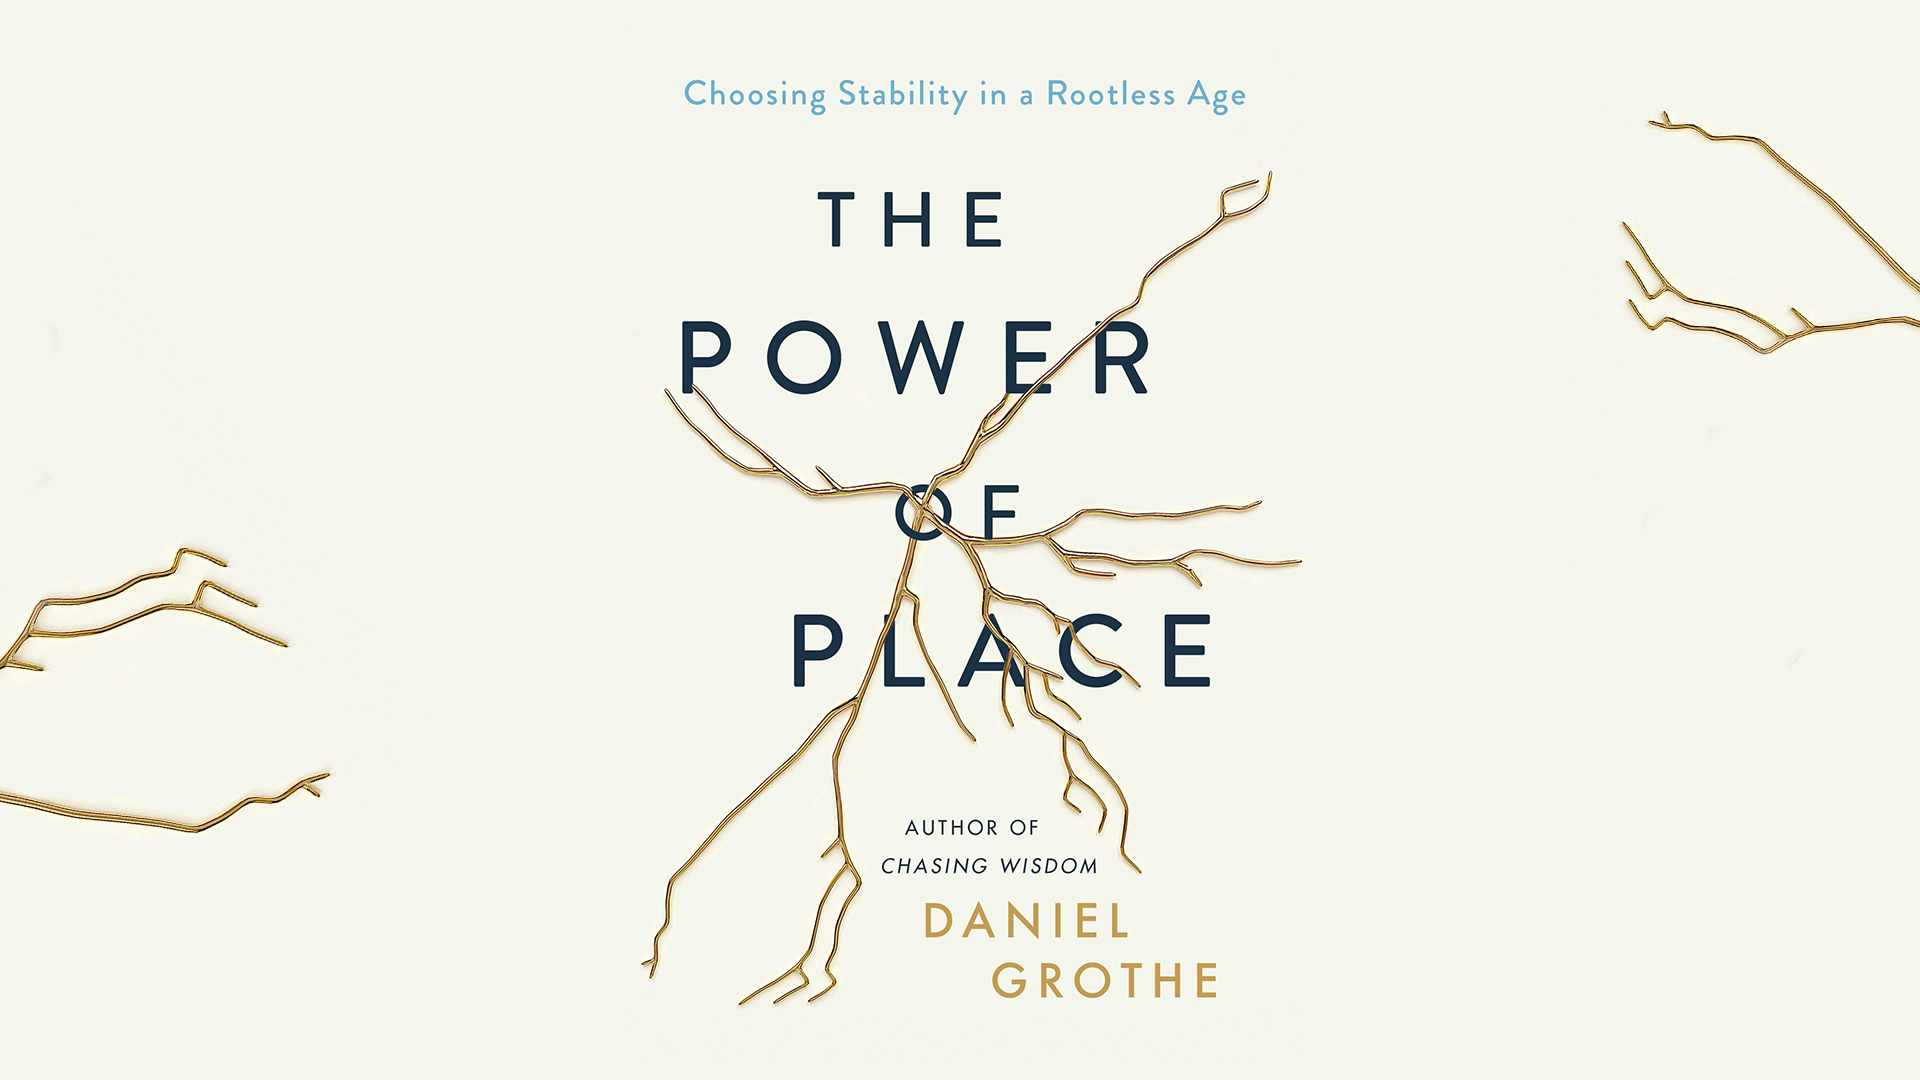 Daniel Grothe: The Power of Place